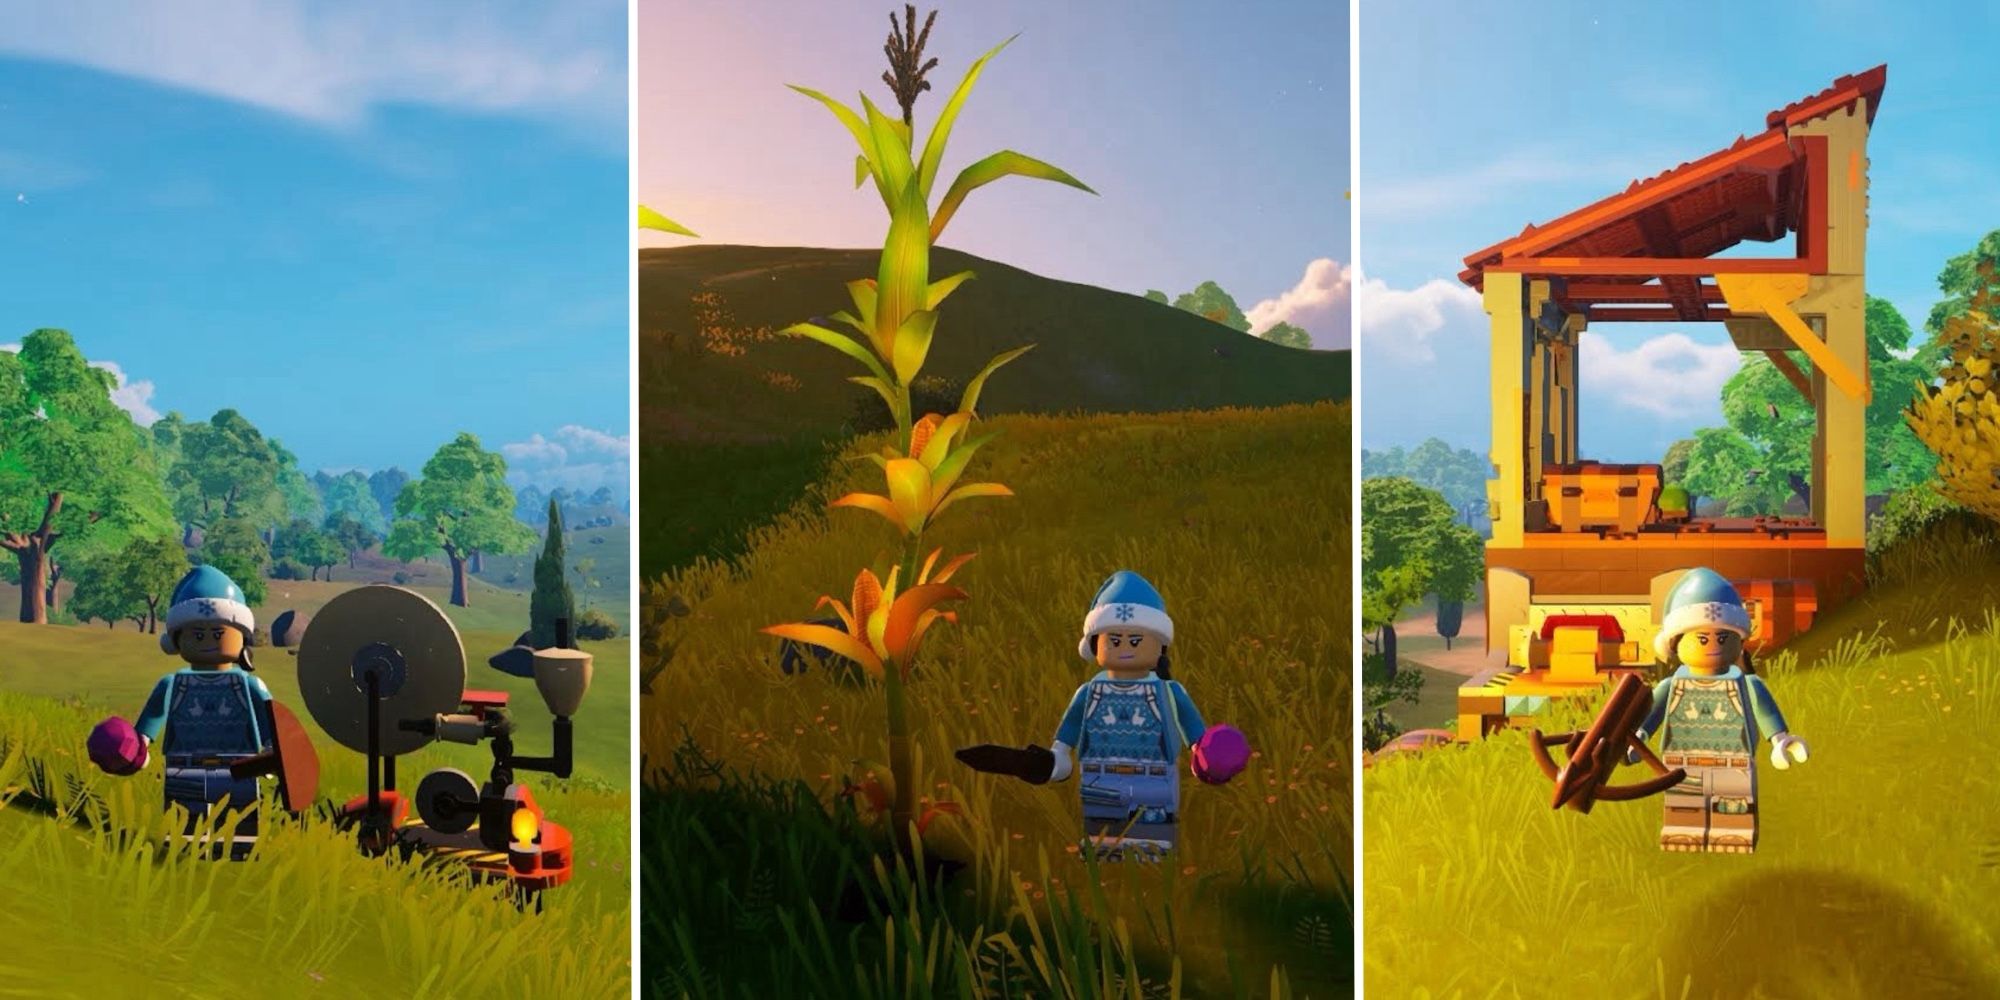 Lego Fortnite avatar standing near a corn stalk in the center panel, an avatar standing near a spinning wheel in the left panel, and an avatar holding a crossbow standing in front of a simple shack in the right panel. All the pictures are related to obtaining cord in the game.